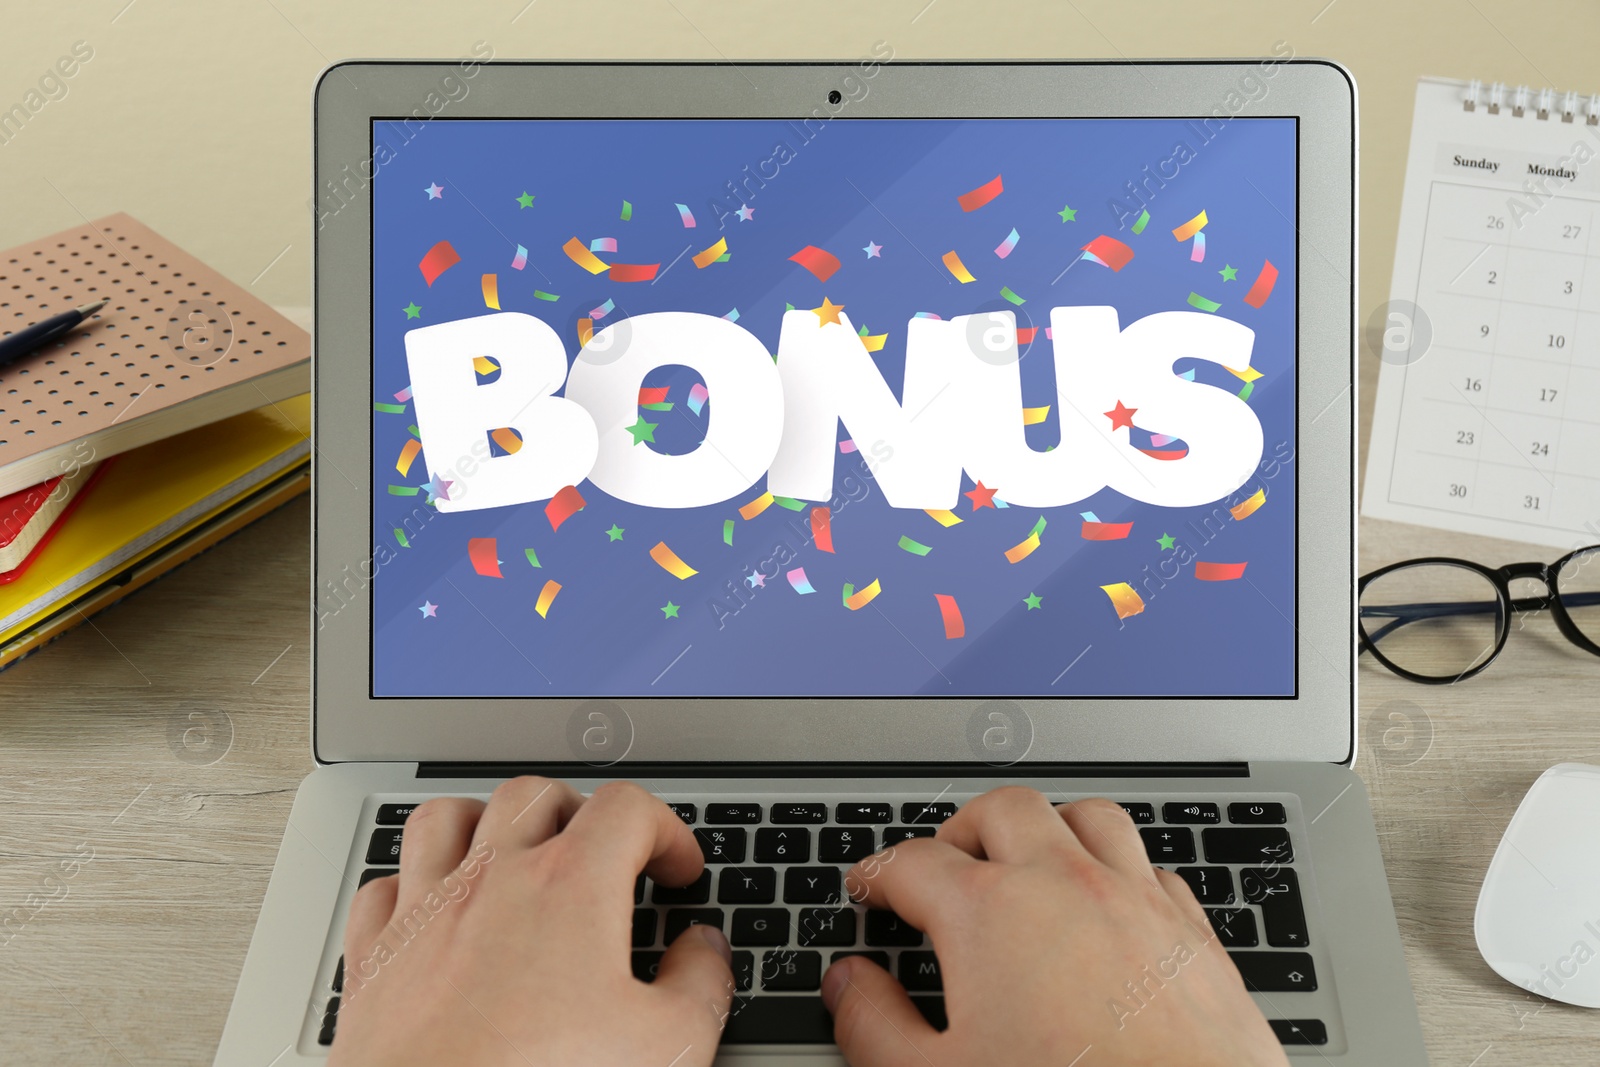 Image of Bonus gaining. Woman using laptop at wooden table, closeup. Illustration of falling confetti and word on device screen